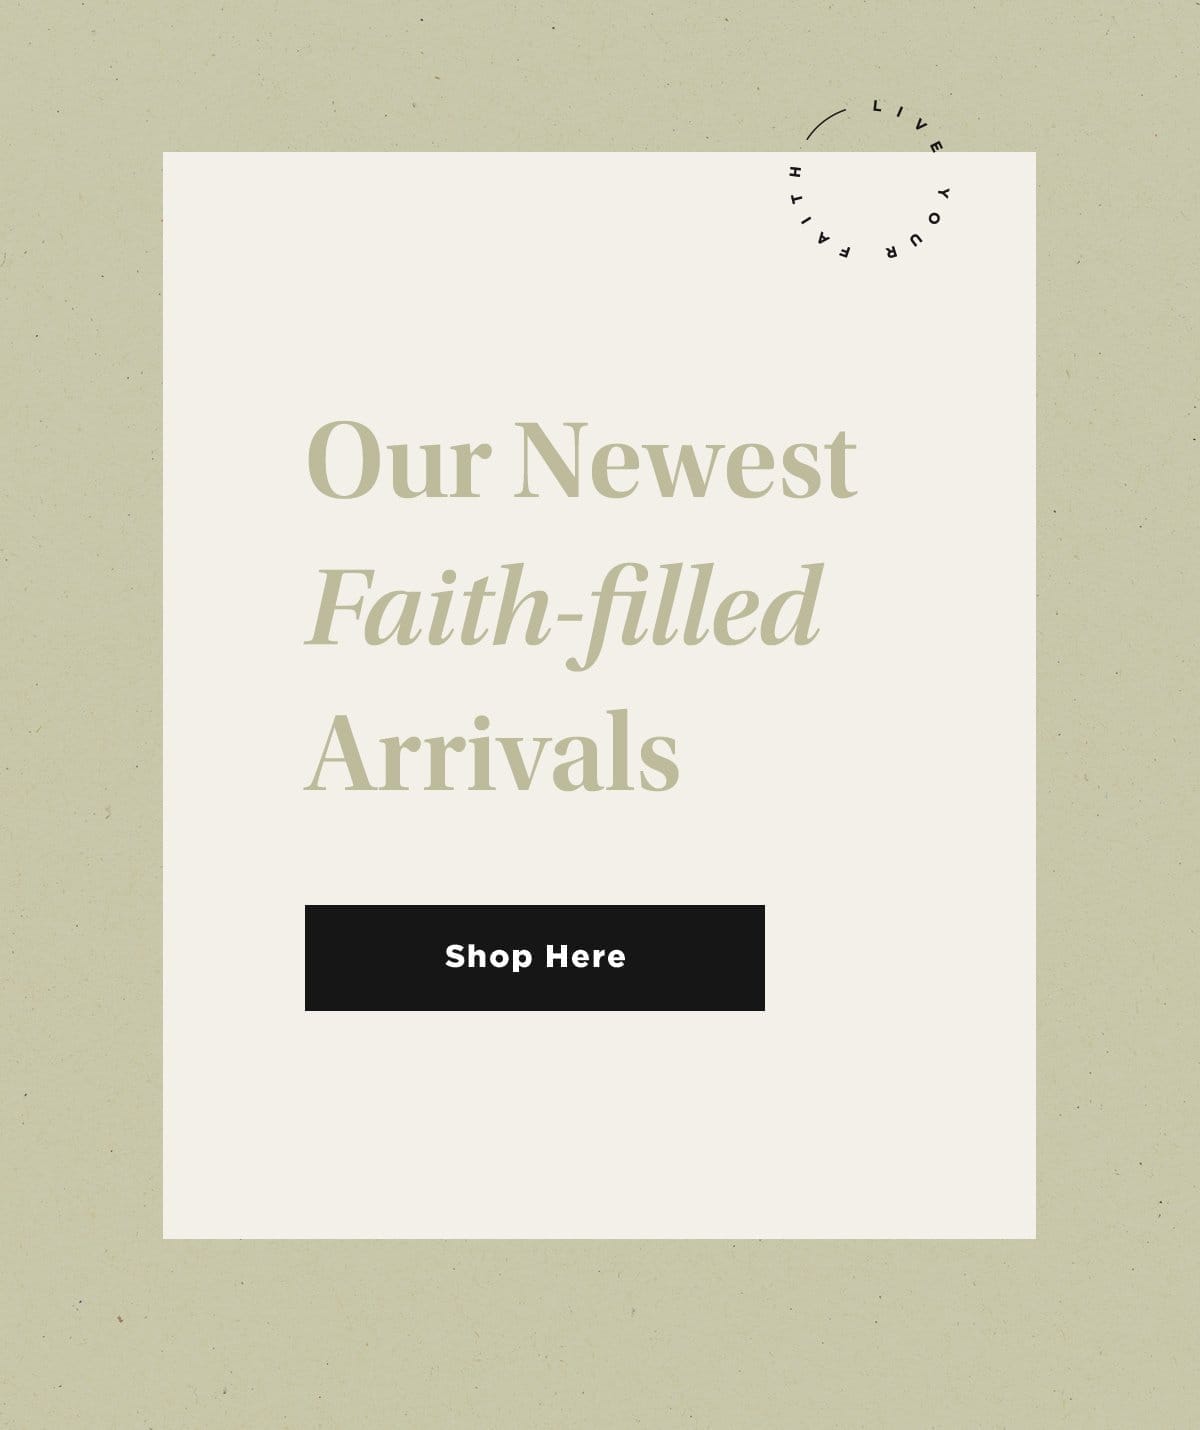 Our Newest Faith-filled Arrivals Shop Here